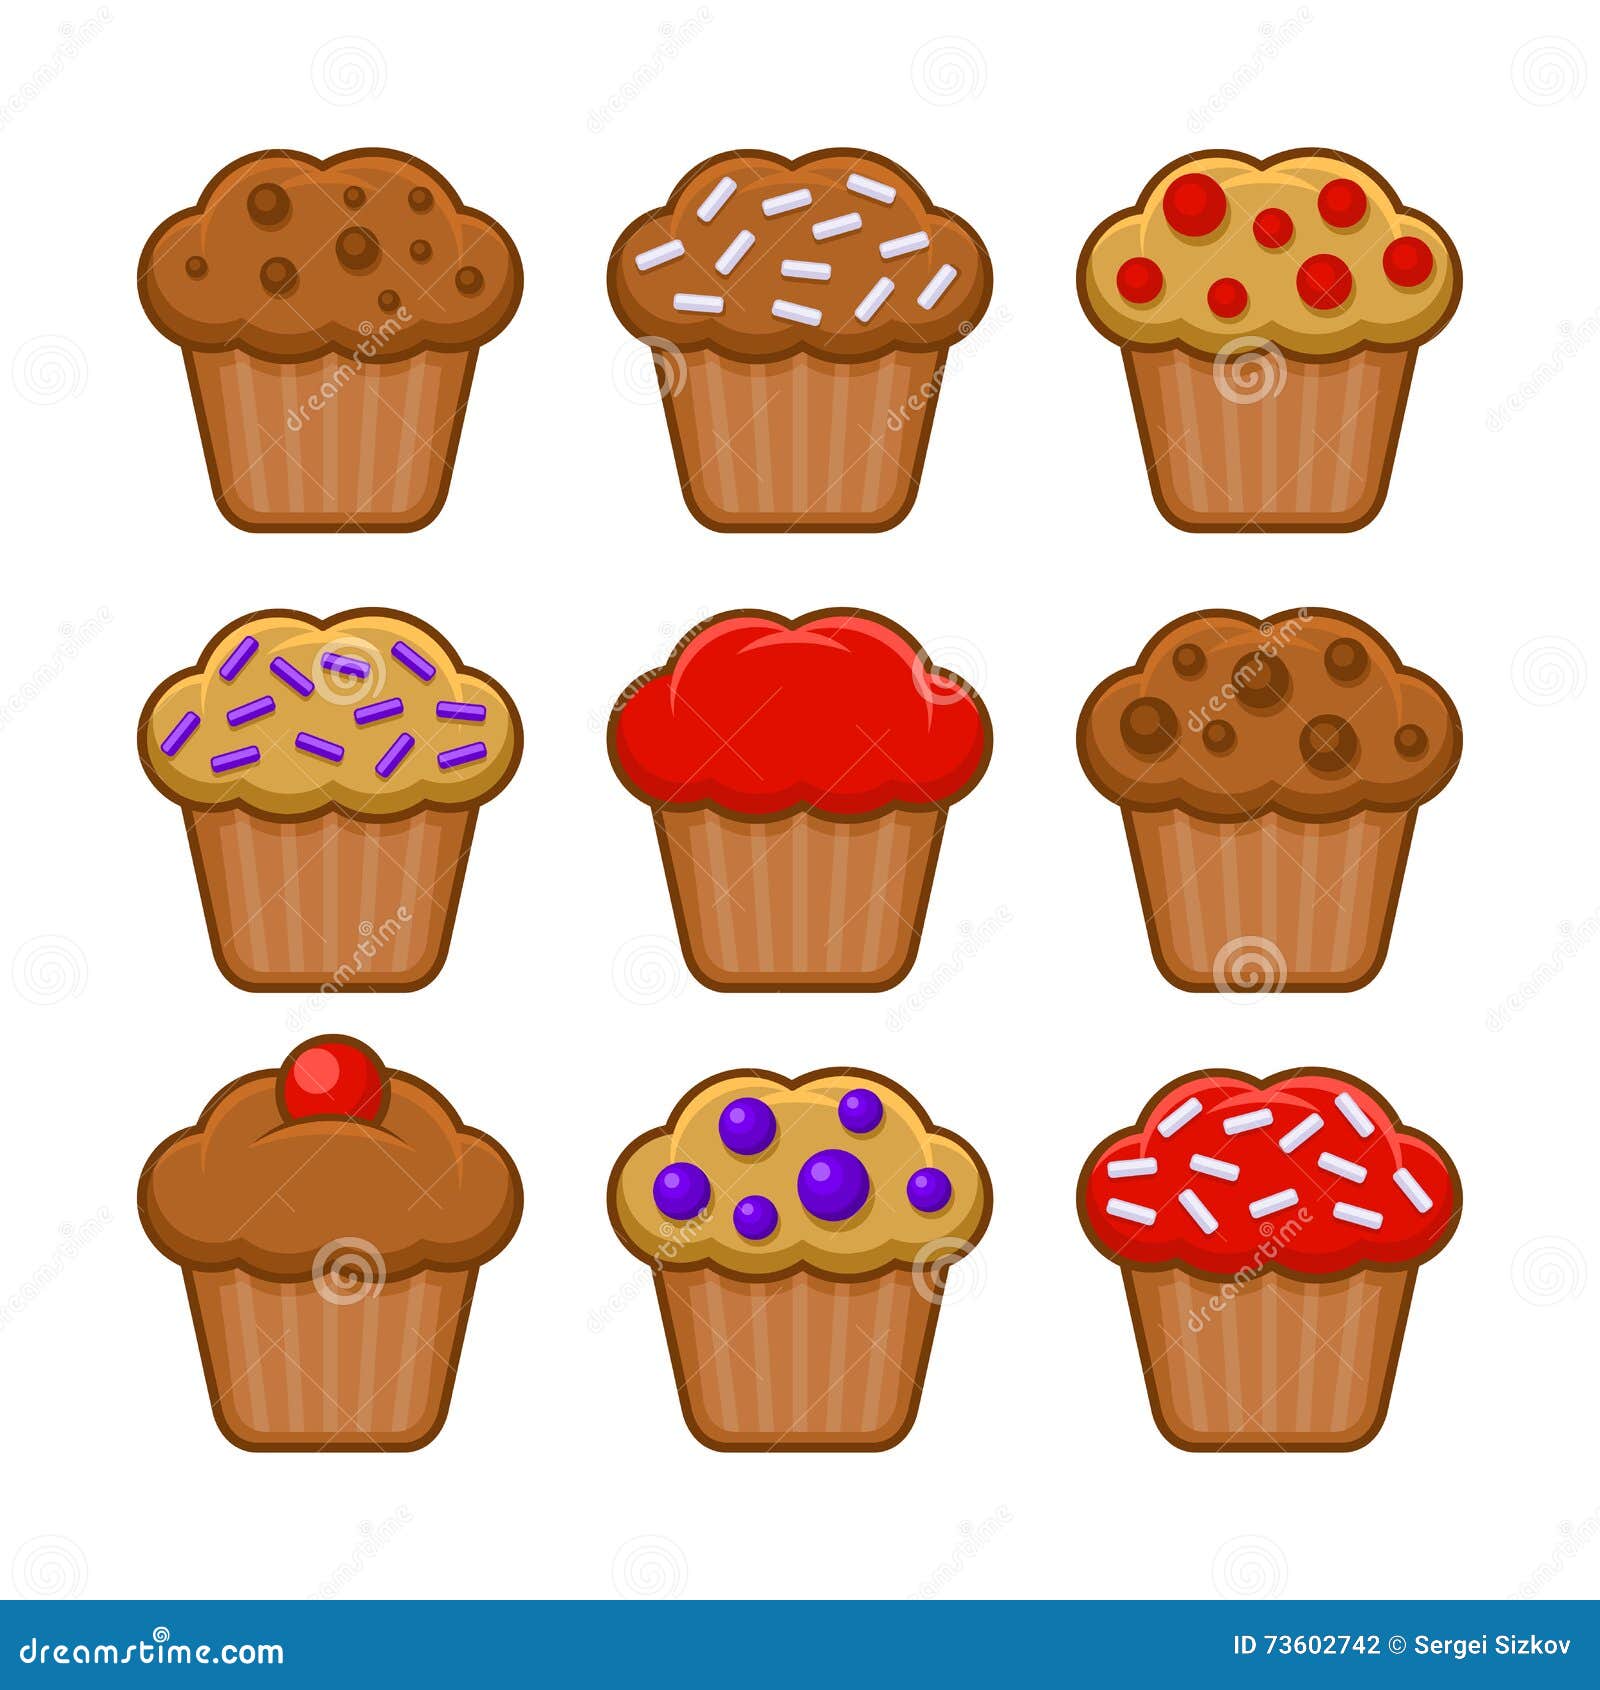 muffin icon set. blueberry, chocolate and cherry cupcake. 